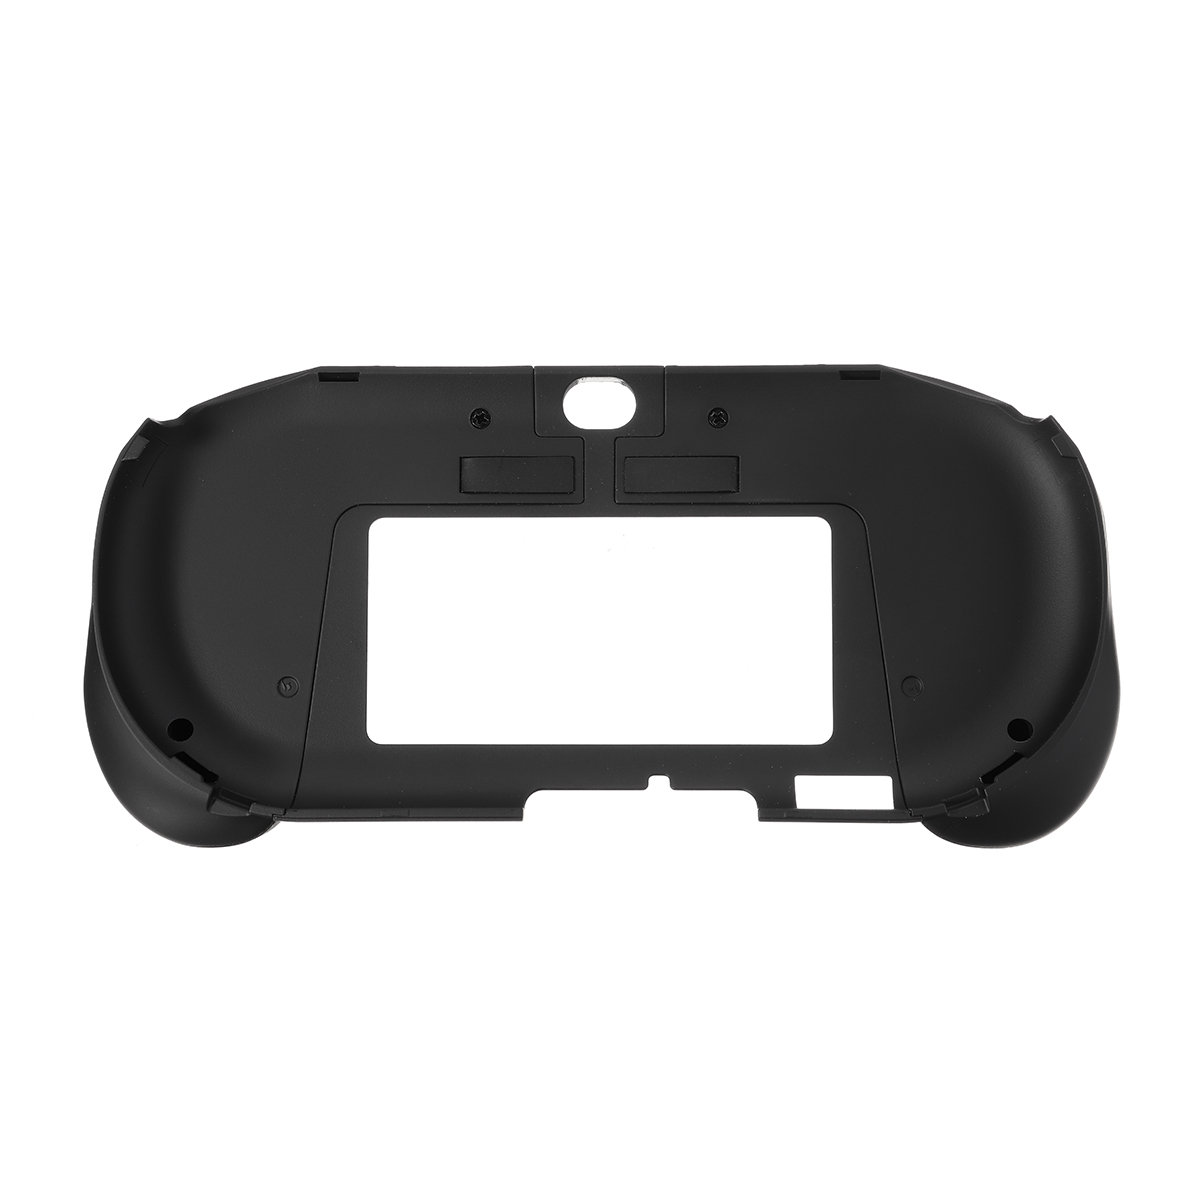 L2 R2 Trigger Grips Handle Shell Protective Case for Sony PlayStation PS Vita 2000 Game Console 9